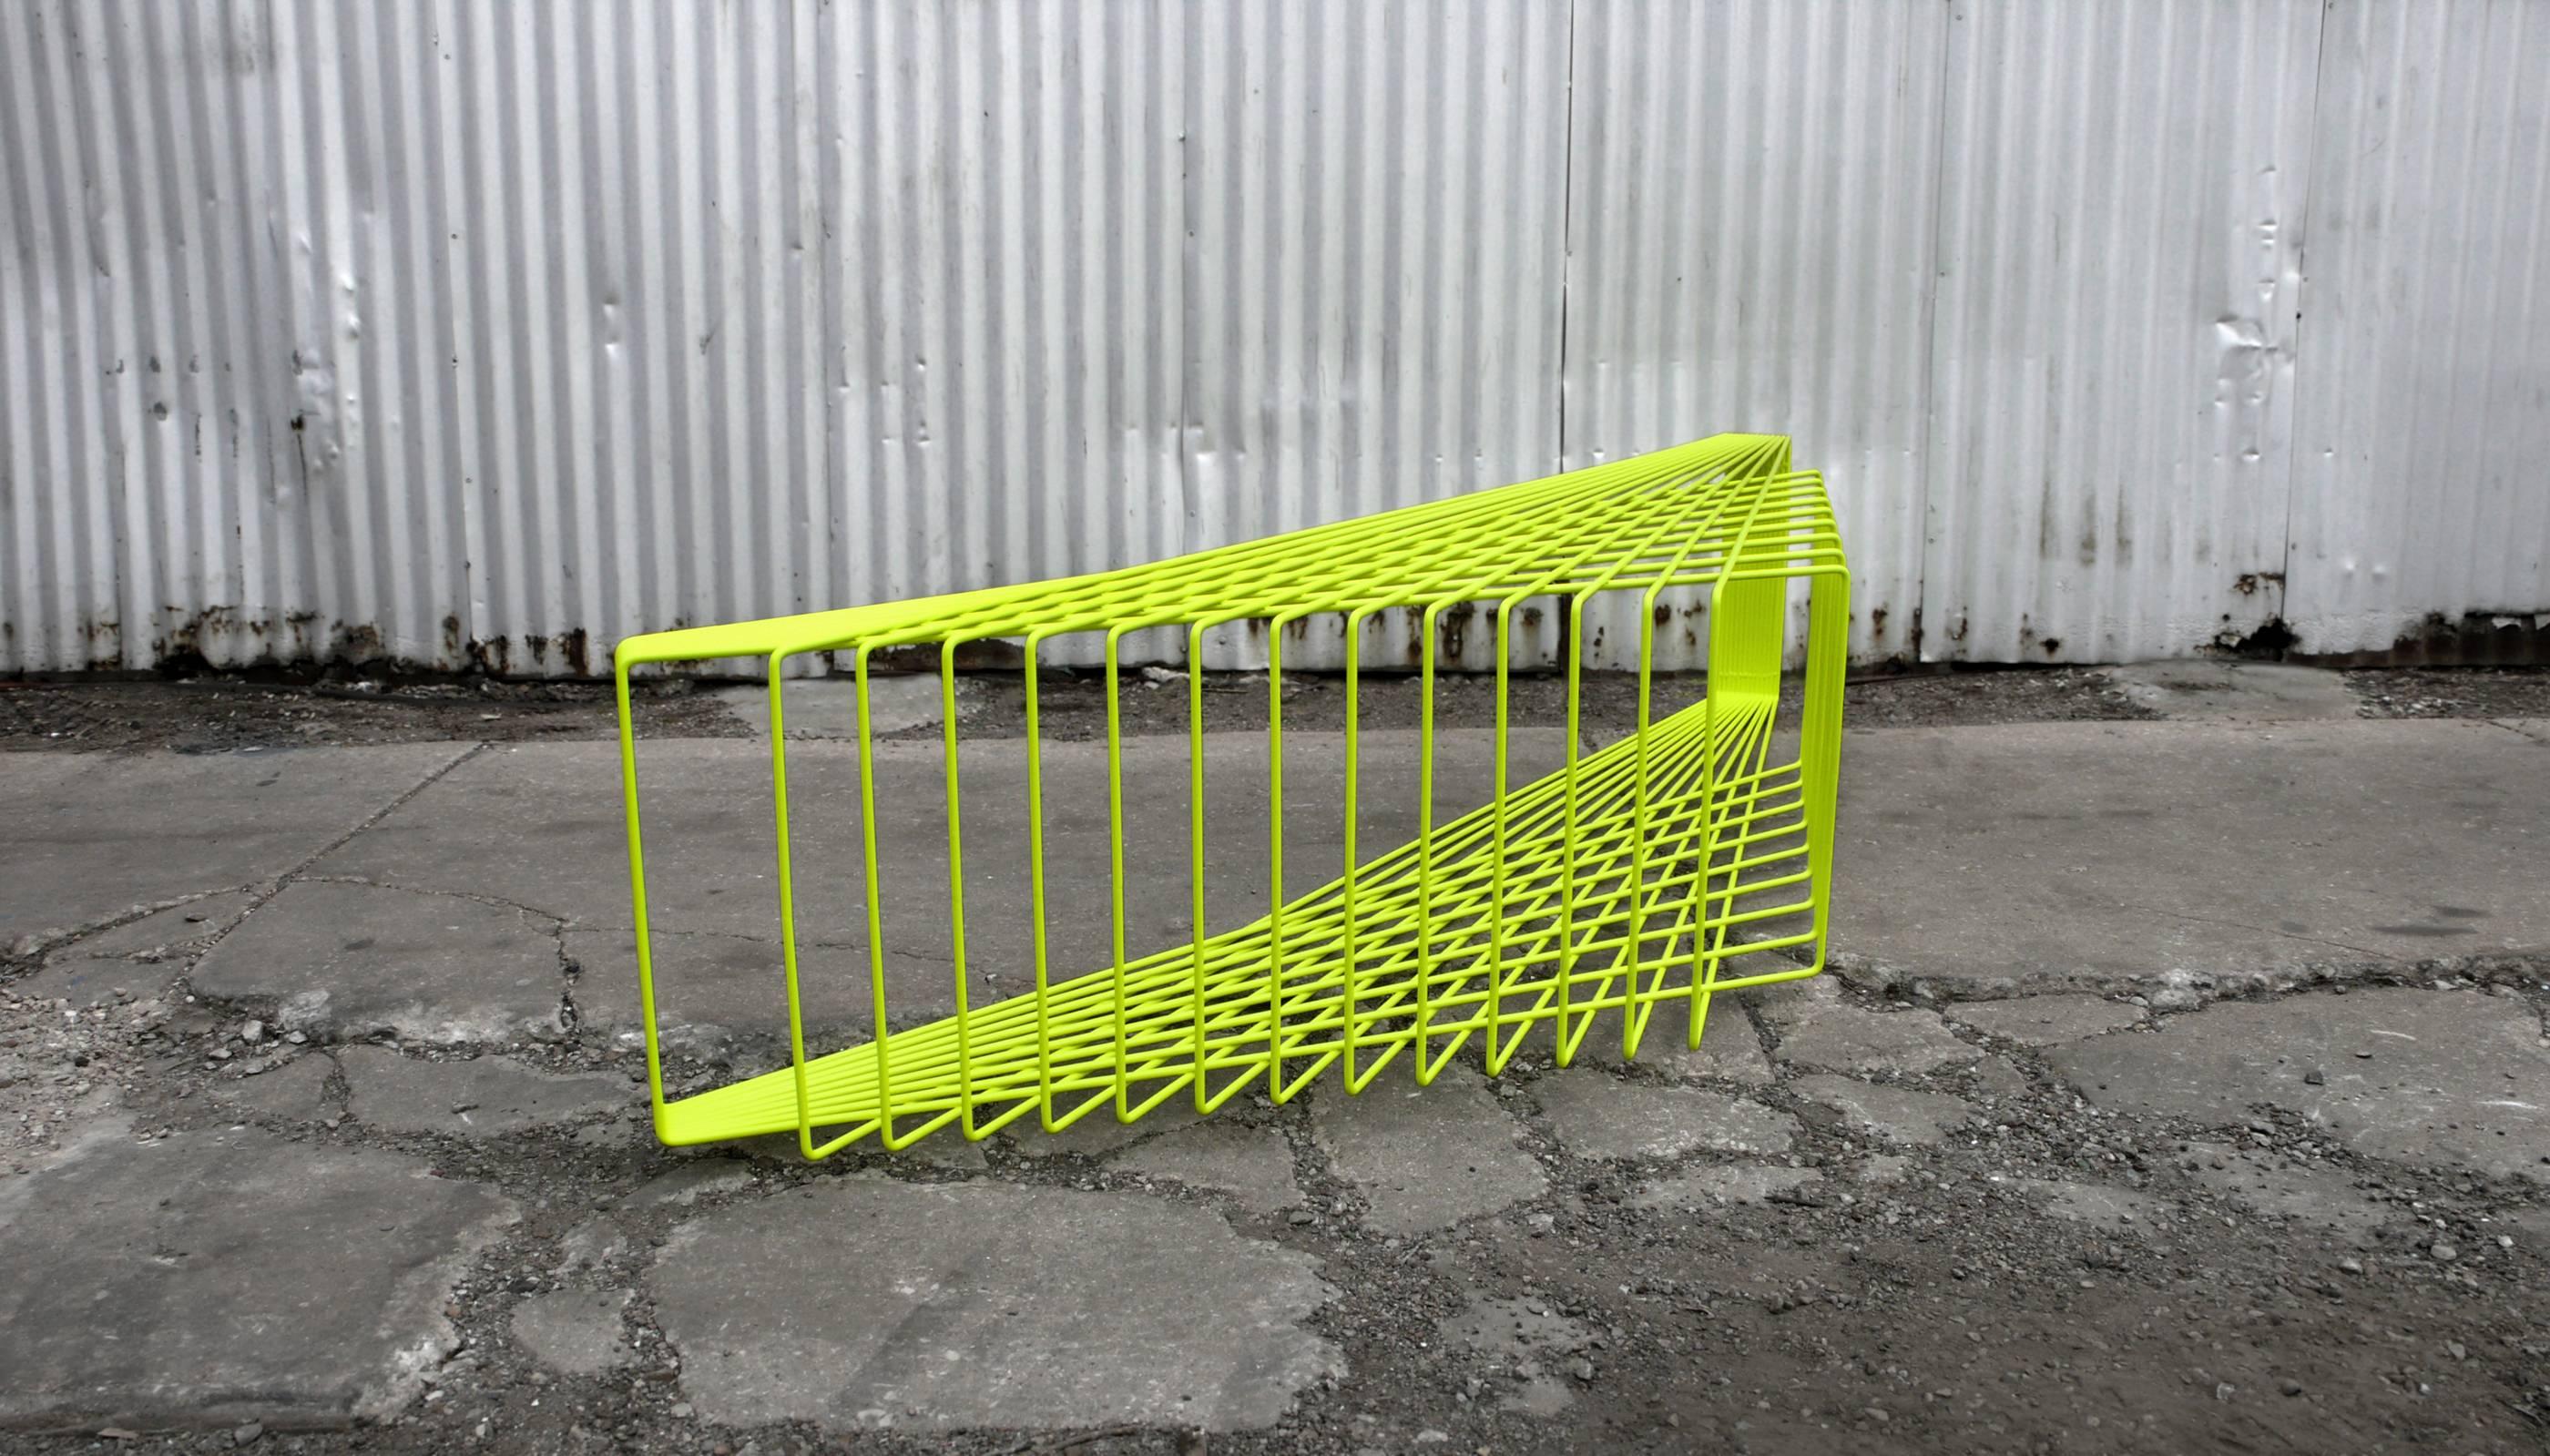 FIELD bench aims to challenge the perception of structure while pushing the limits of a single material. Its projected rays of lines intersect, forming an interdependent system that creates a unique and sculptural seating surface.
 
Custom colors